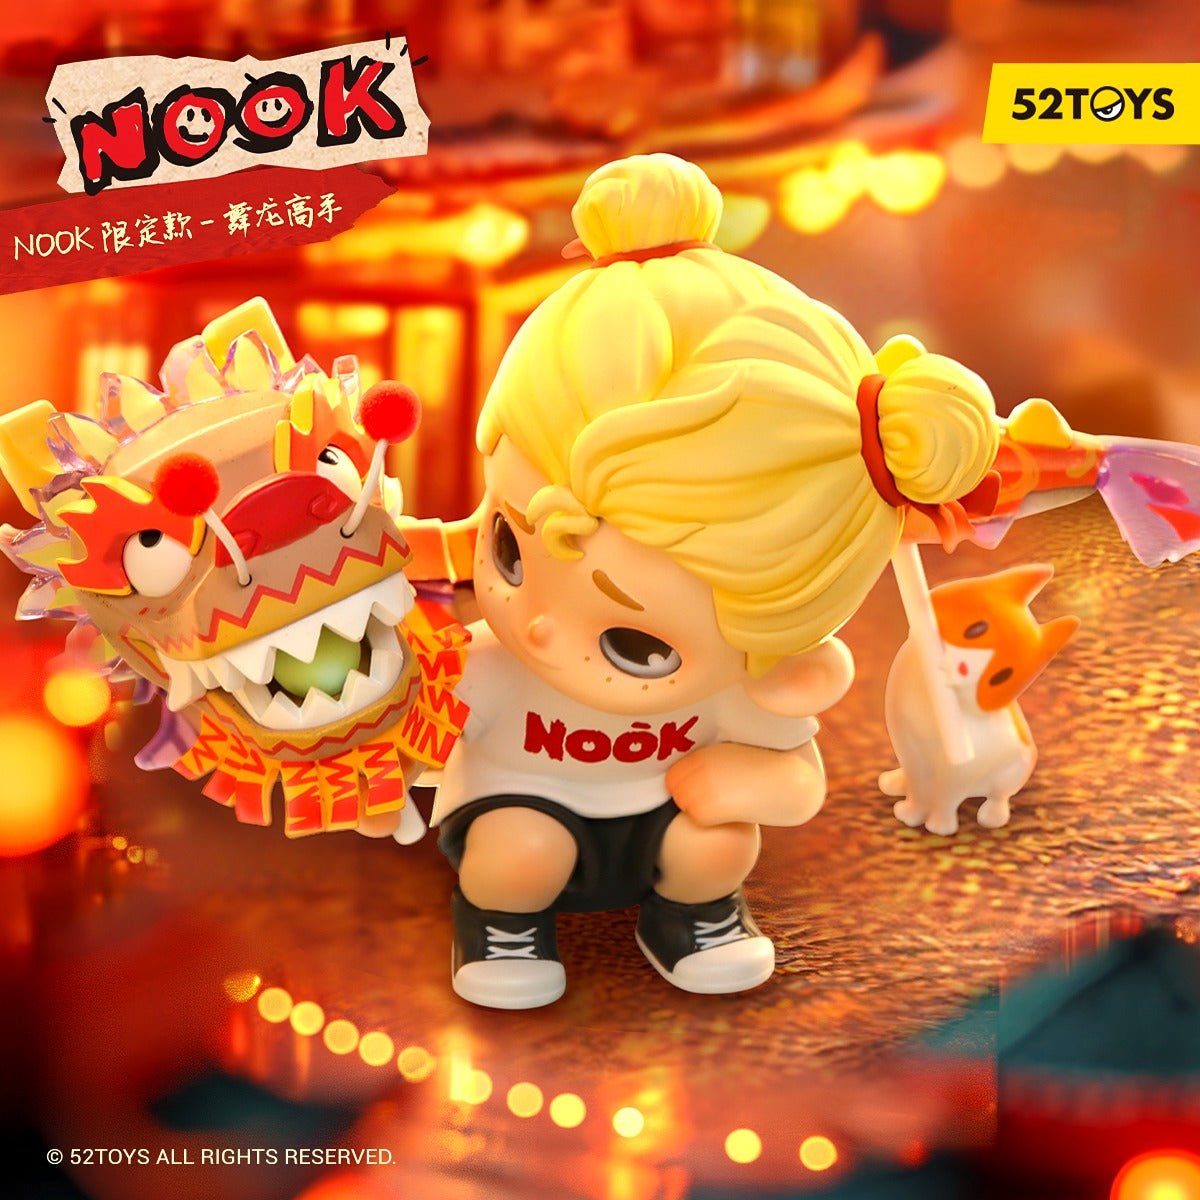 PRE-ORDER 52Toys - Nook: Dragon Dance Performer: Limited Edition